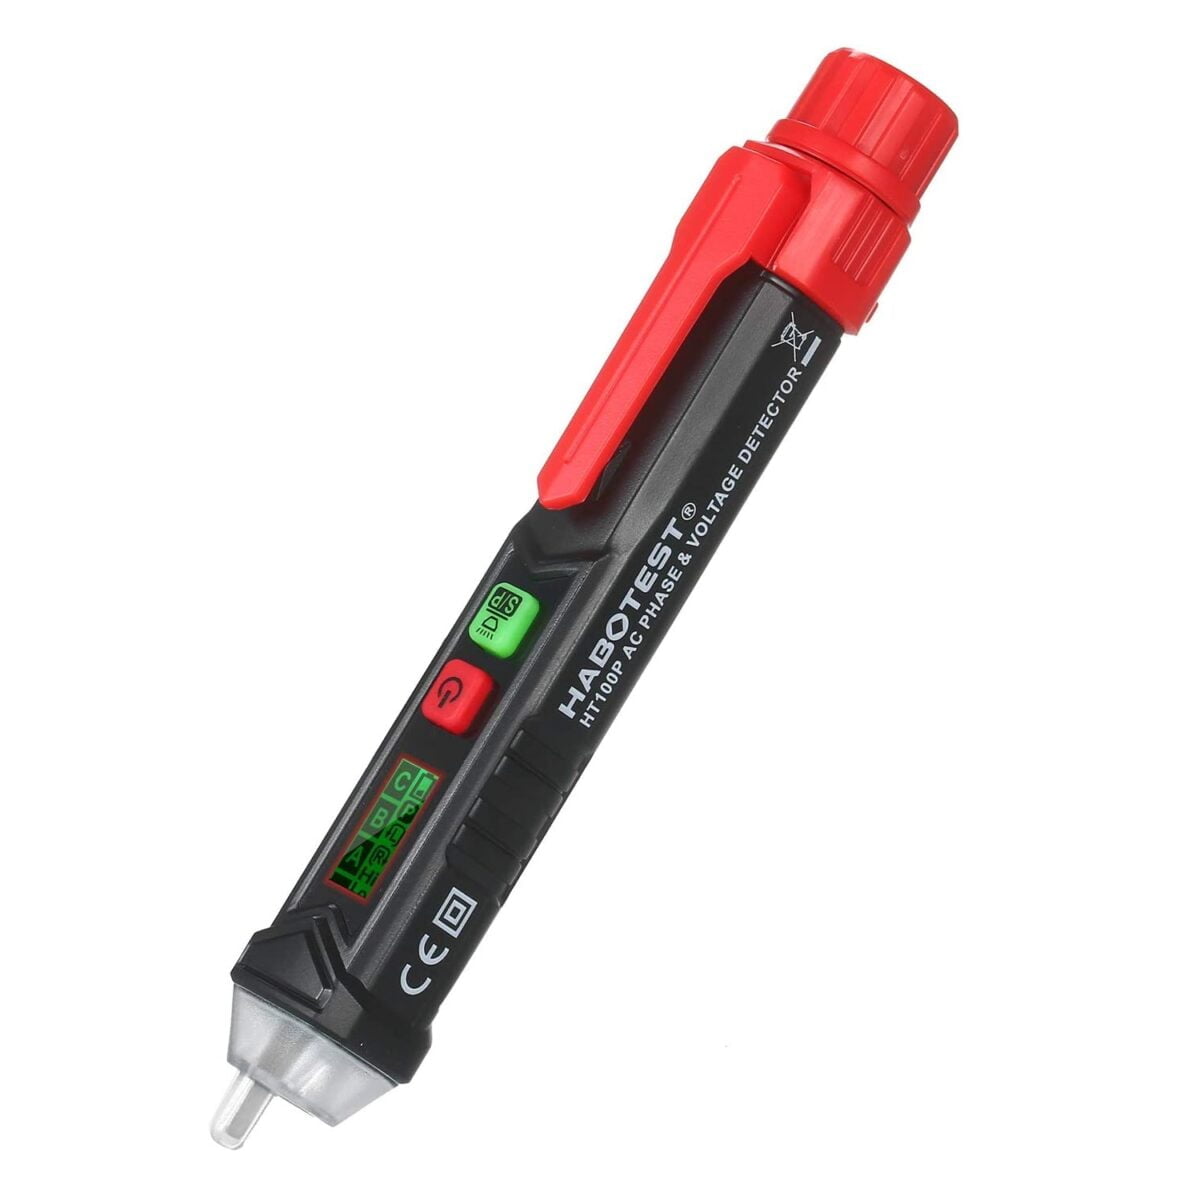 tester tensiune si faza Habotest HT100P